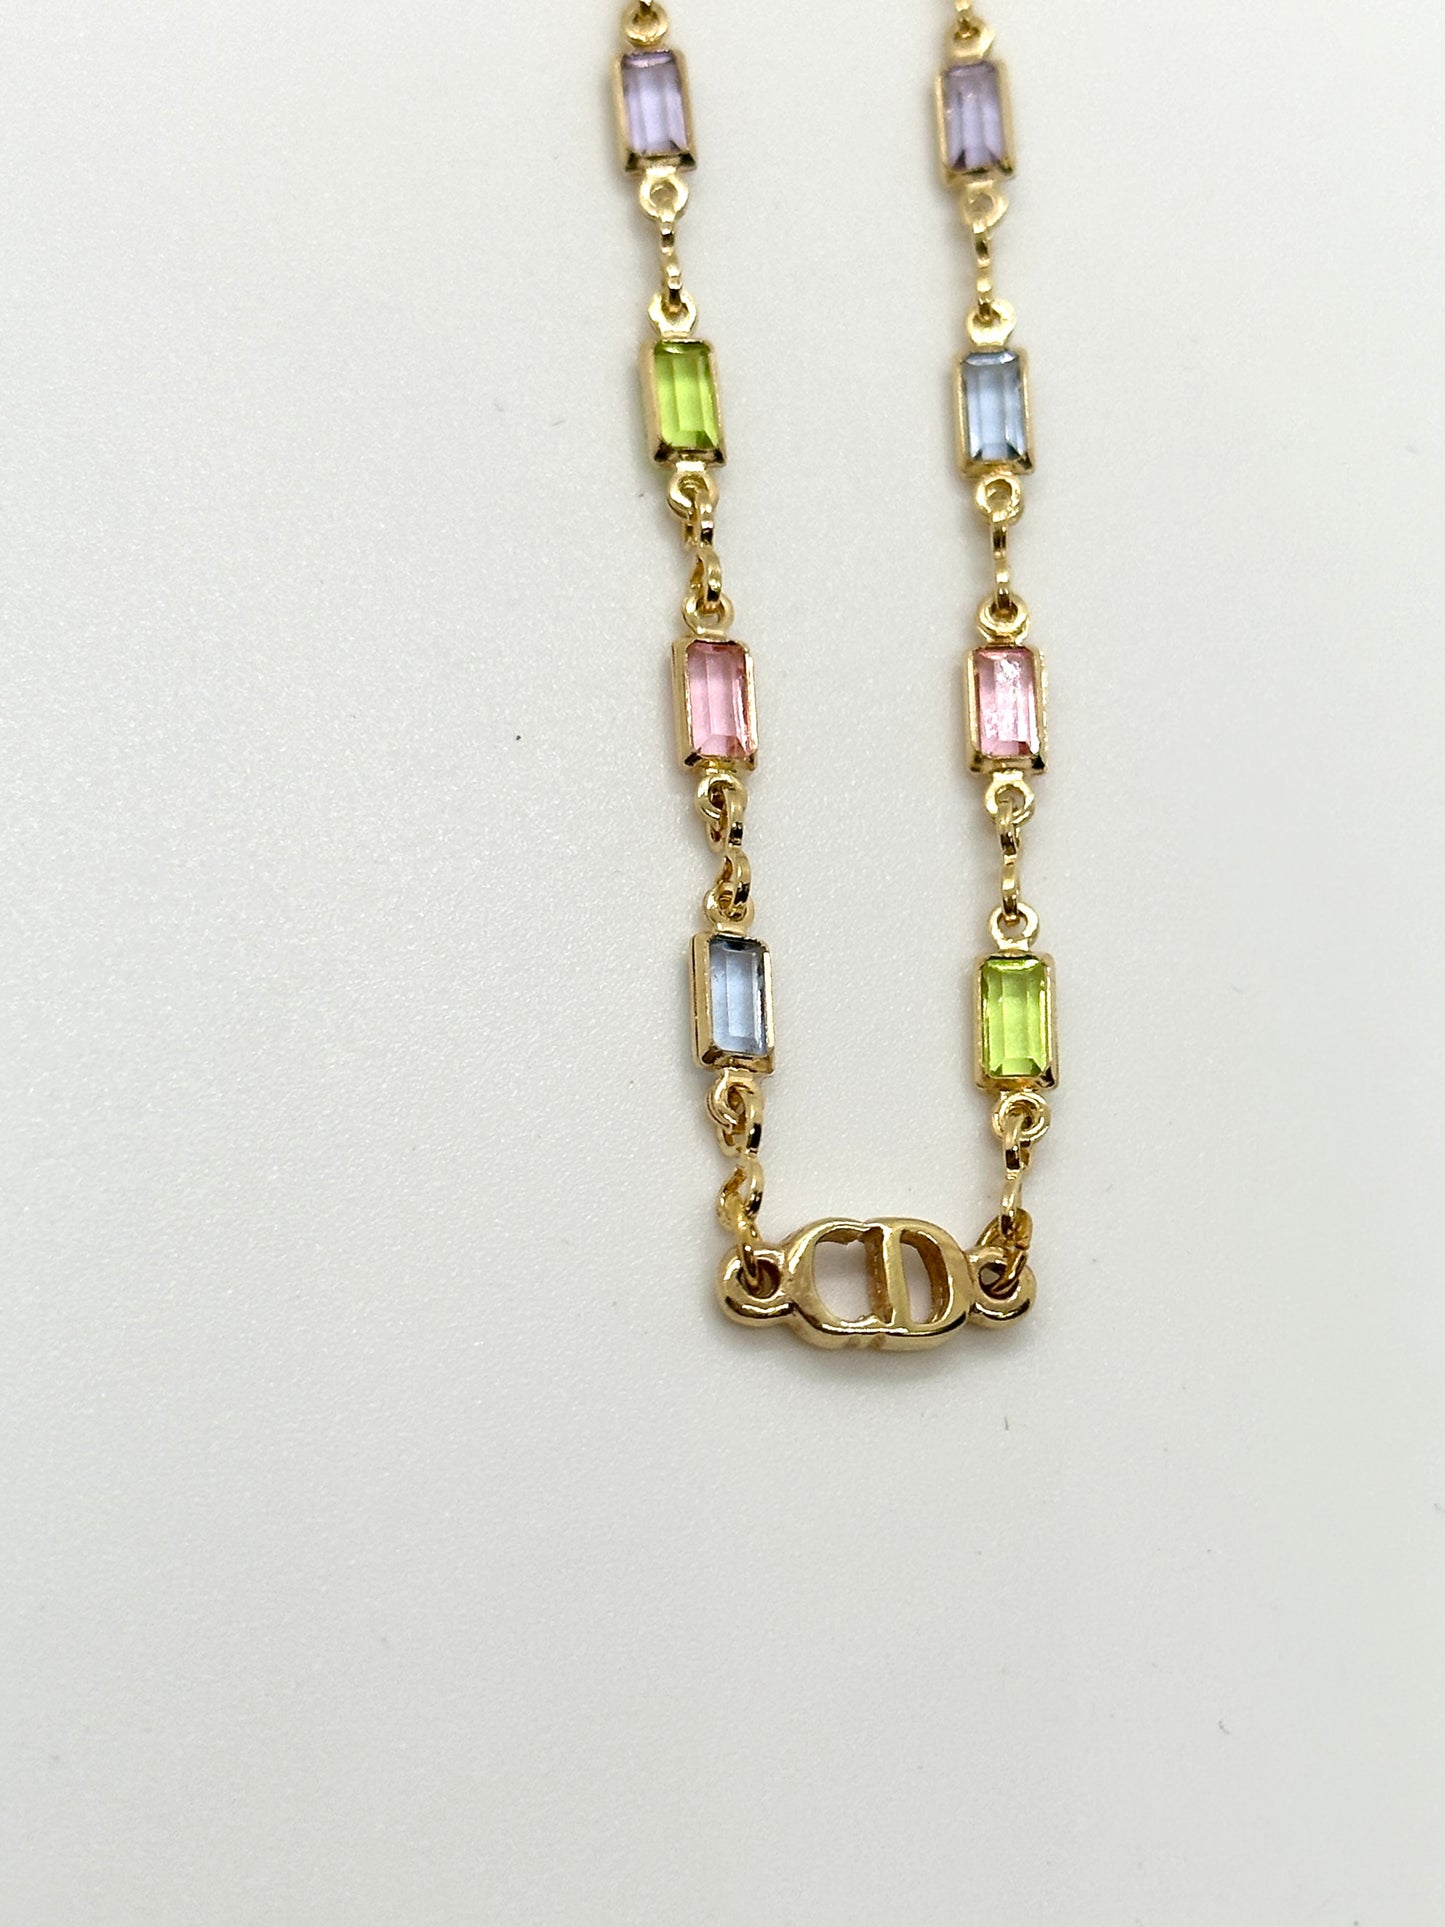 Authentic Dior Multi-Colored Chain | Reworked 16" Necklace